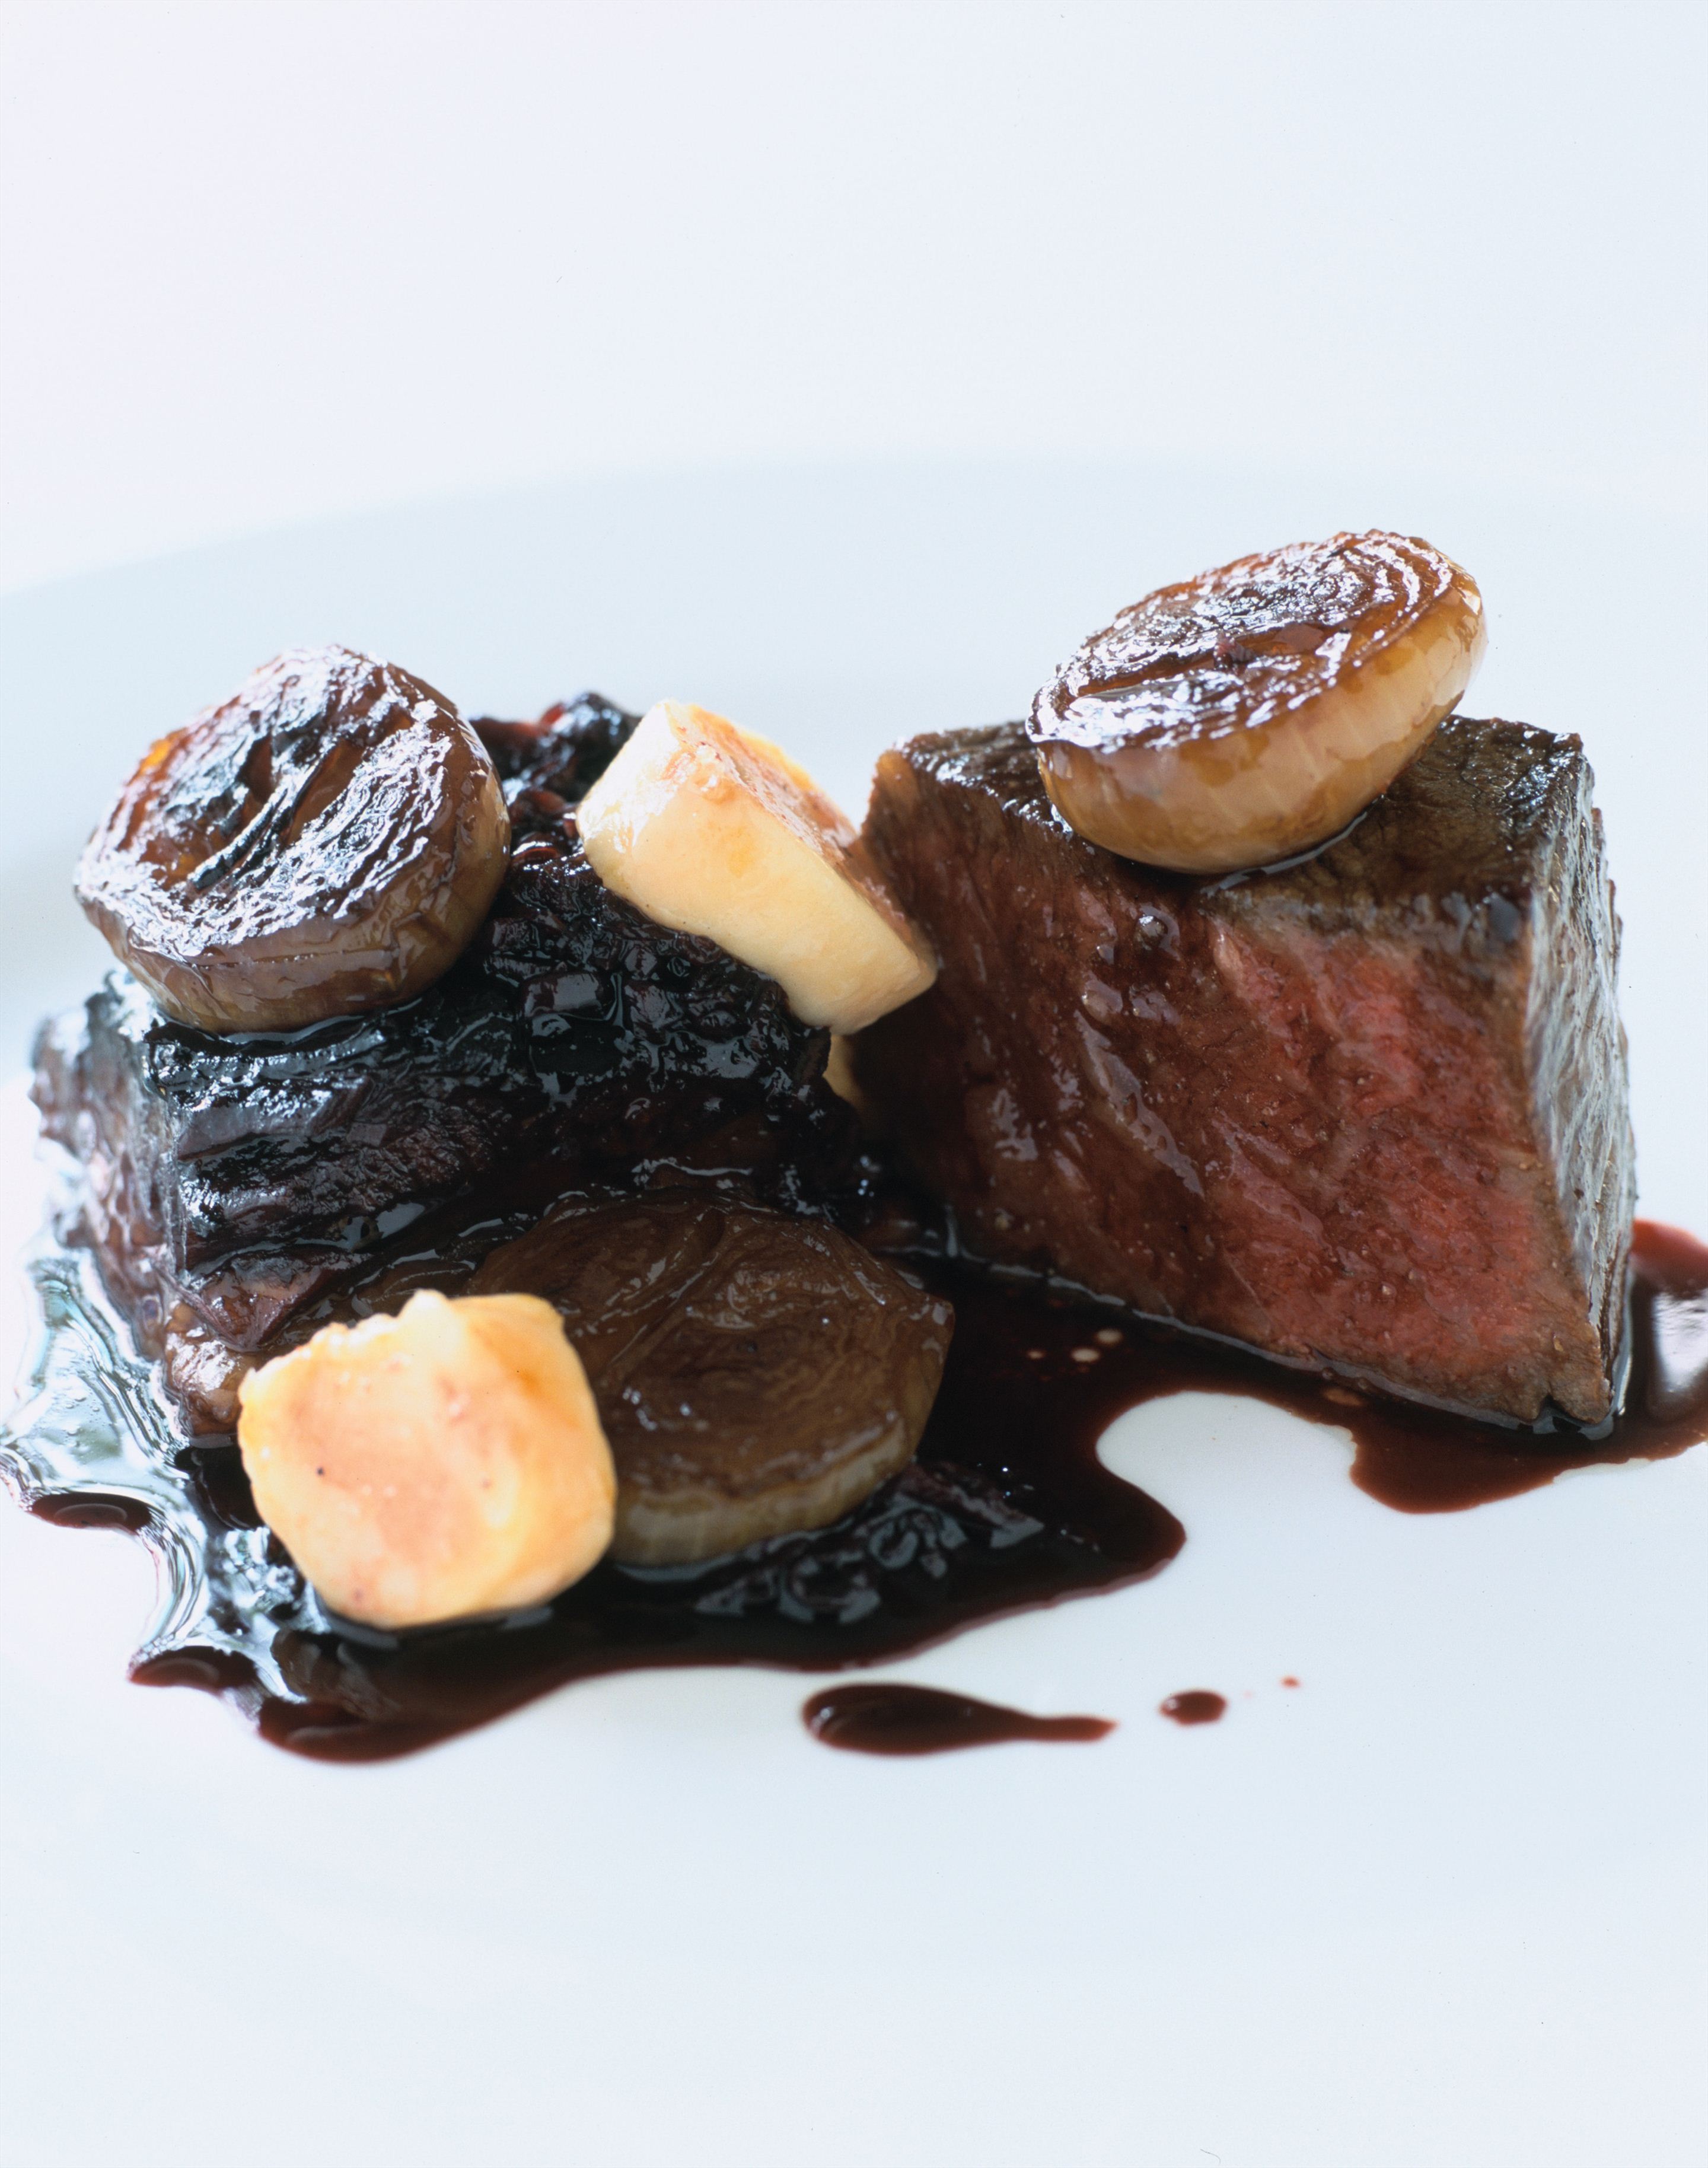 Roast Wagyu sirloin bordelaise with braised brisket and sauce bercy